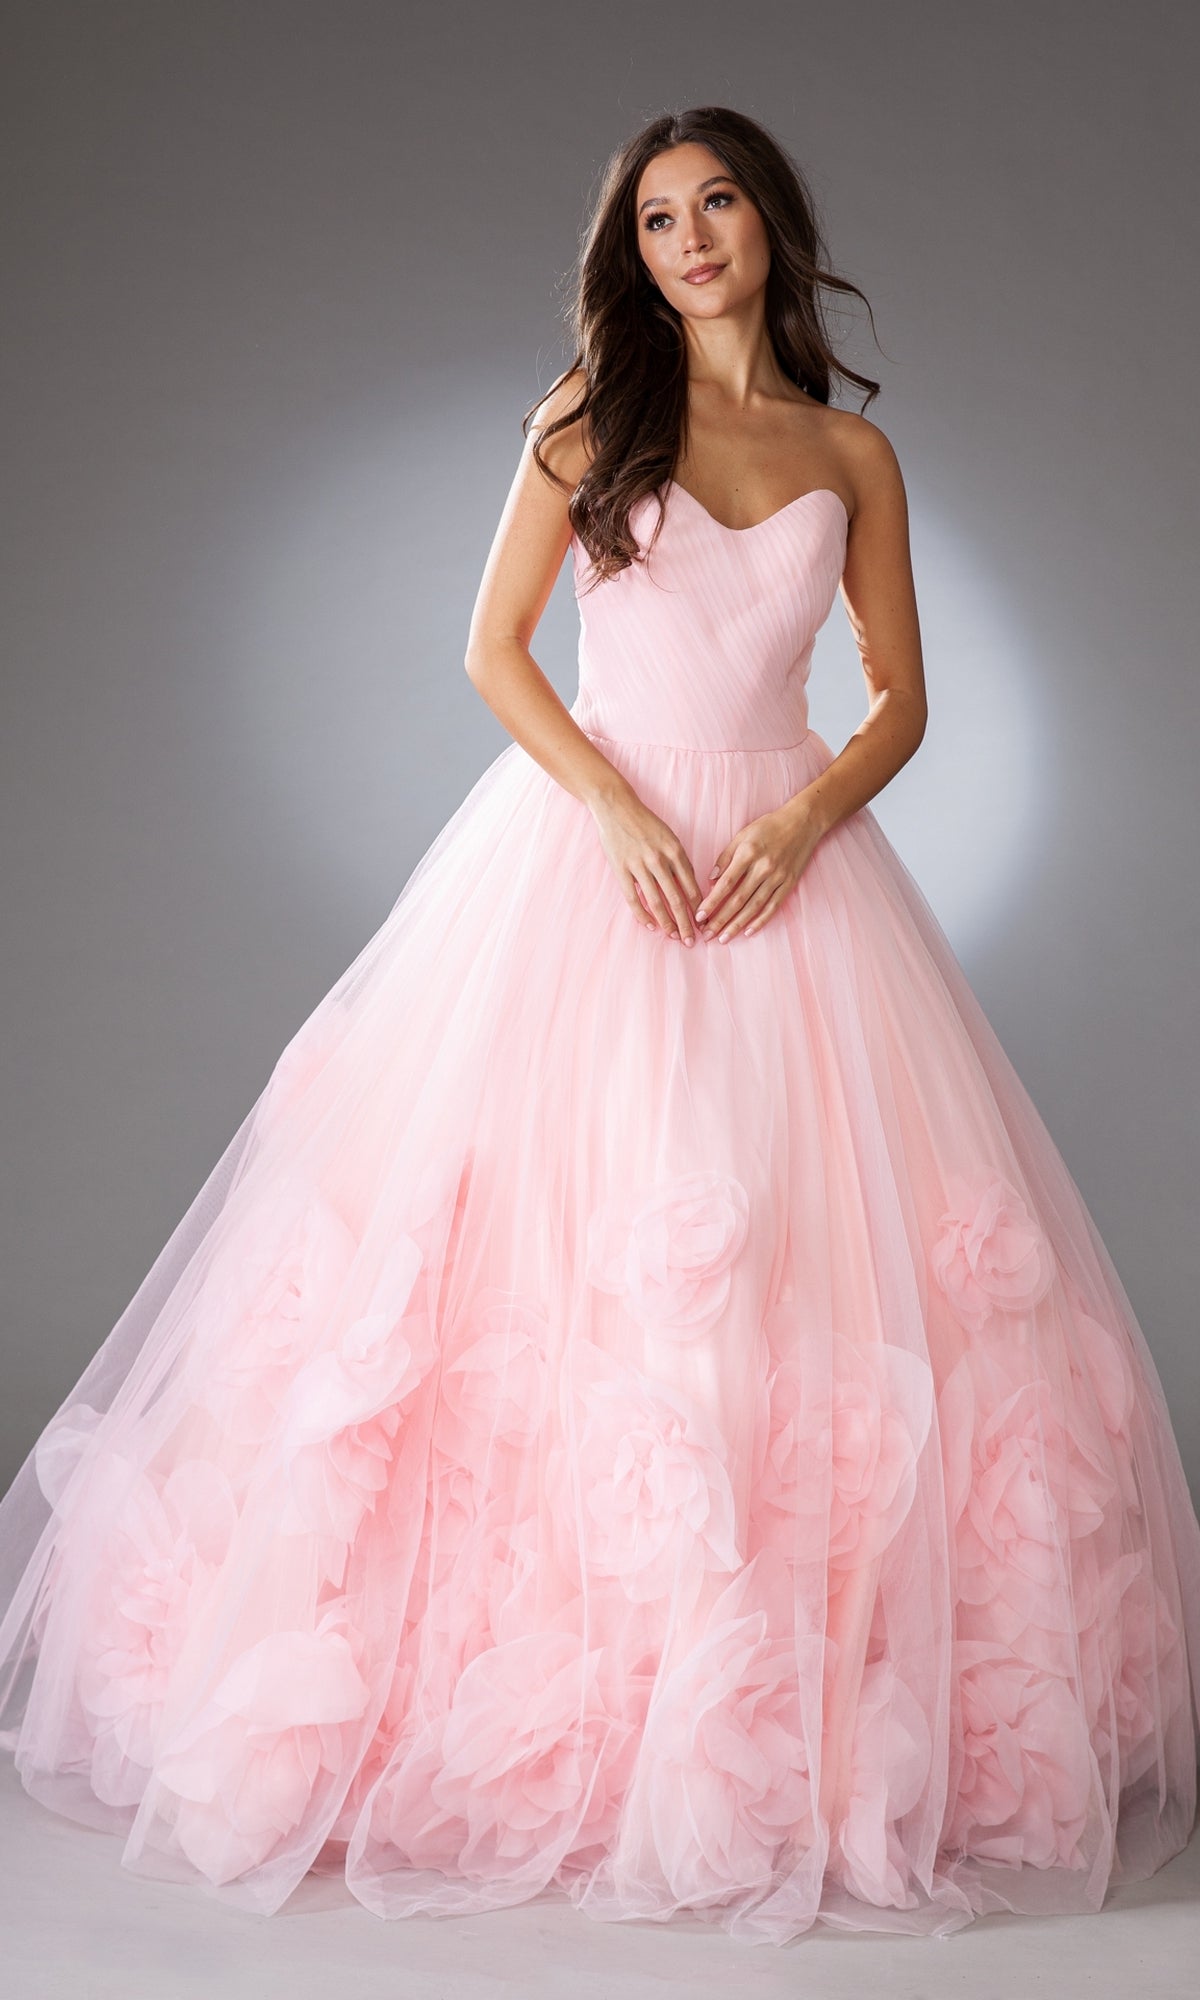 Rosette Ball Gown SU079 by Amelia